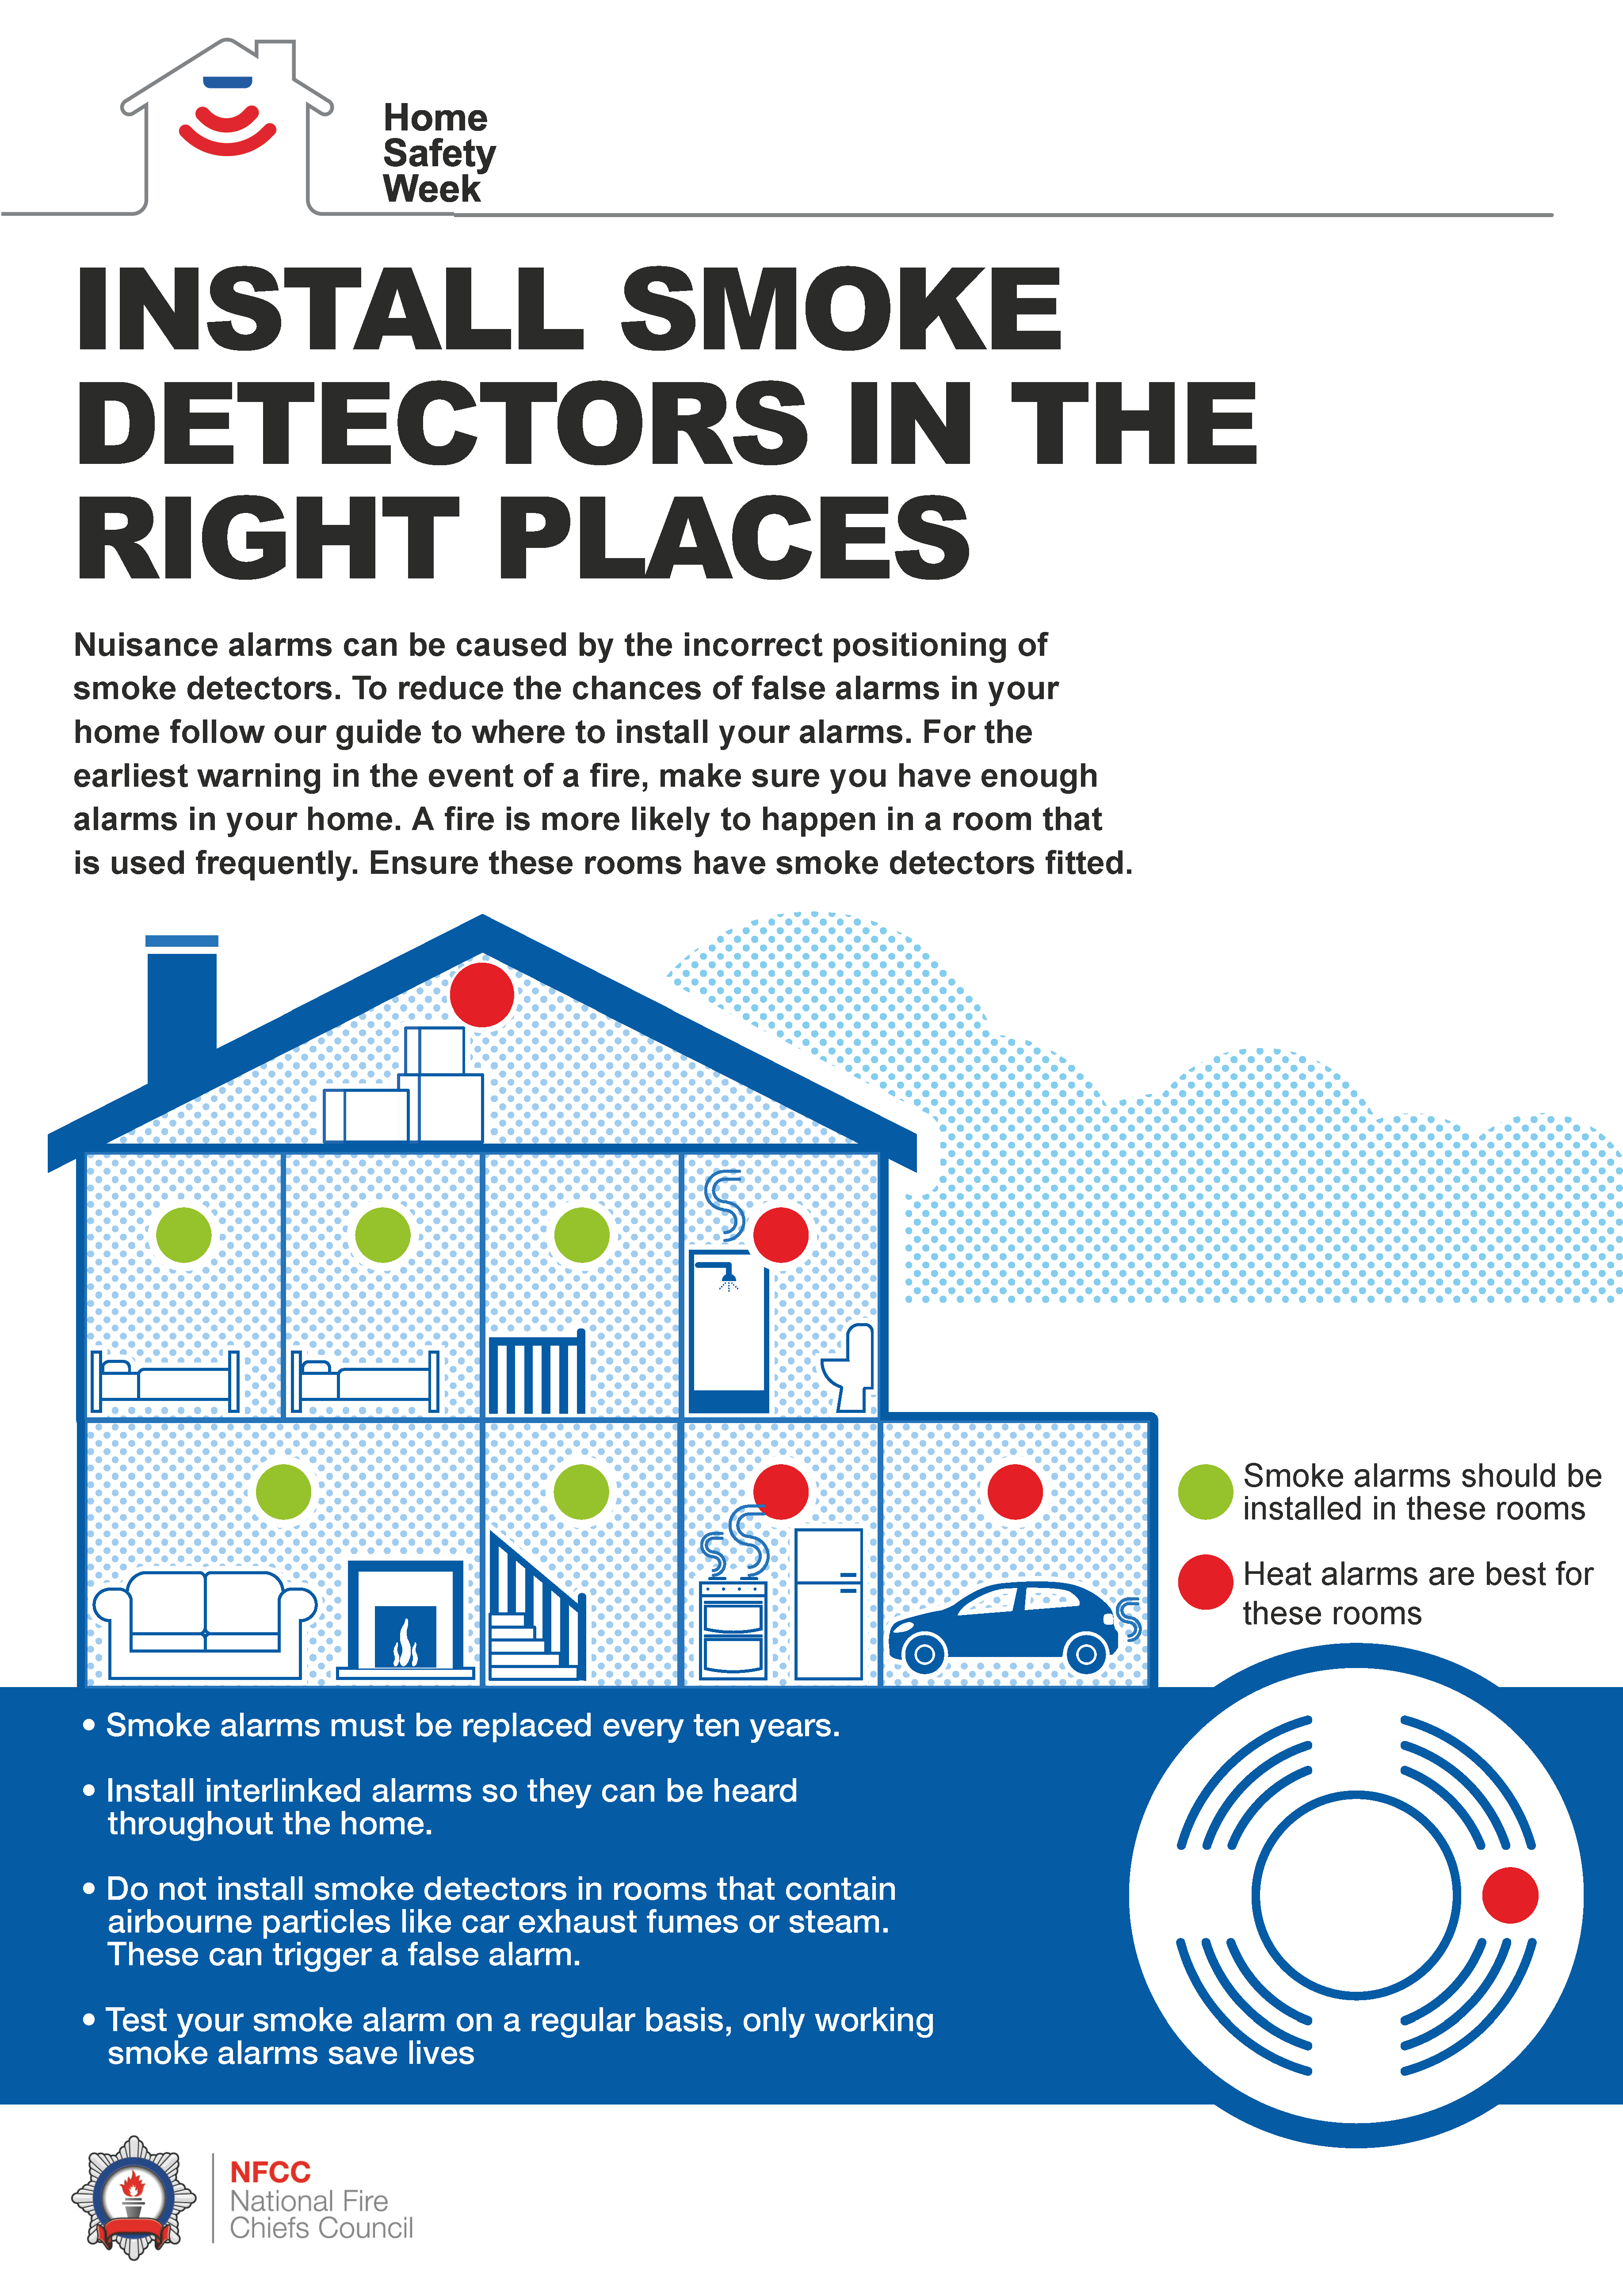 Home Safety Week - smoke alarms install guide for rooms